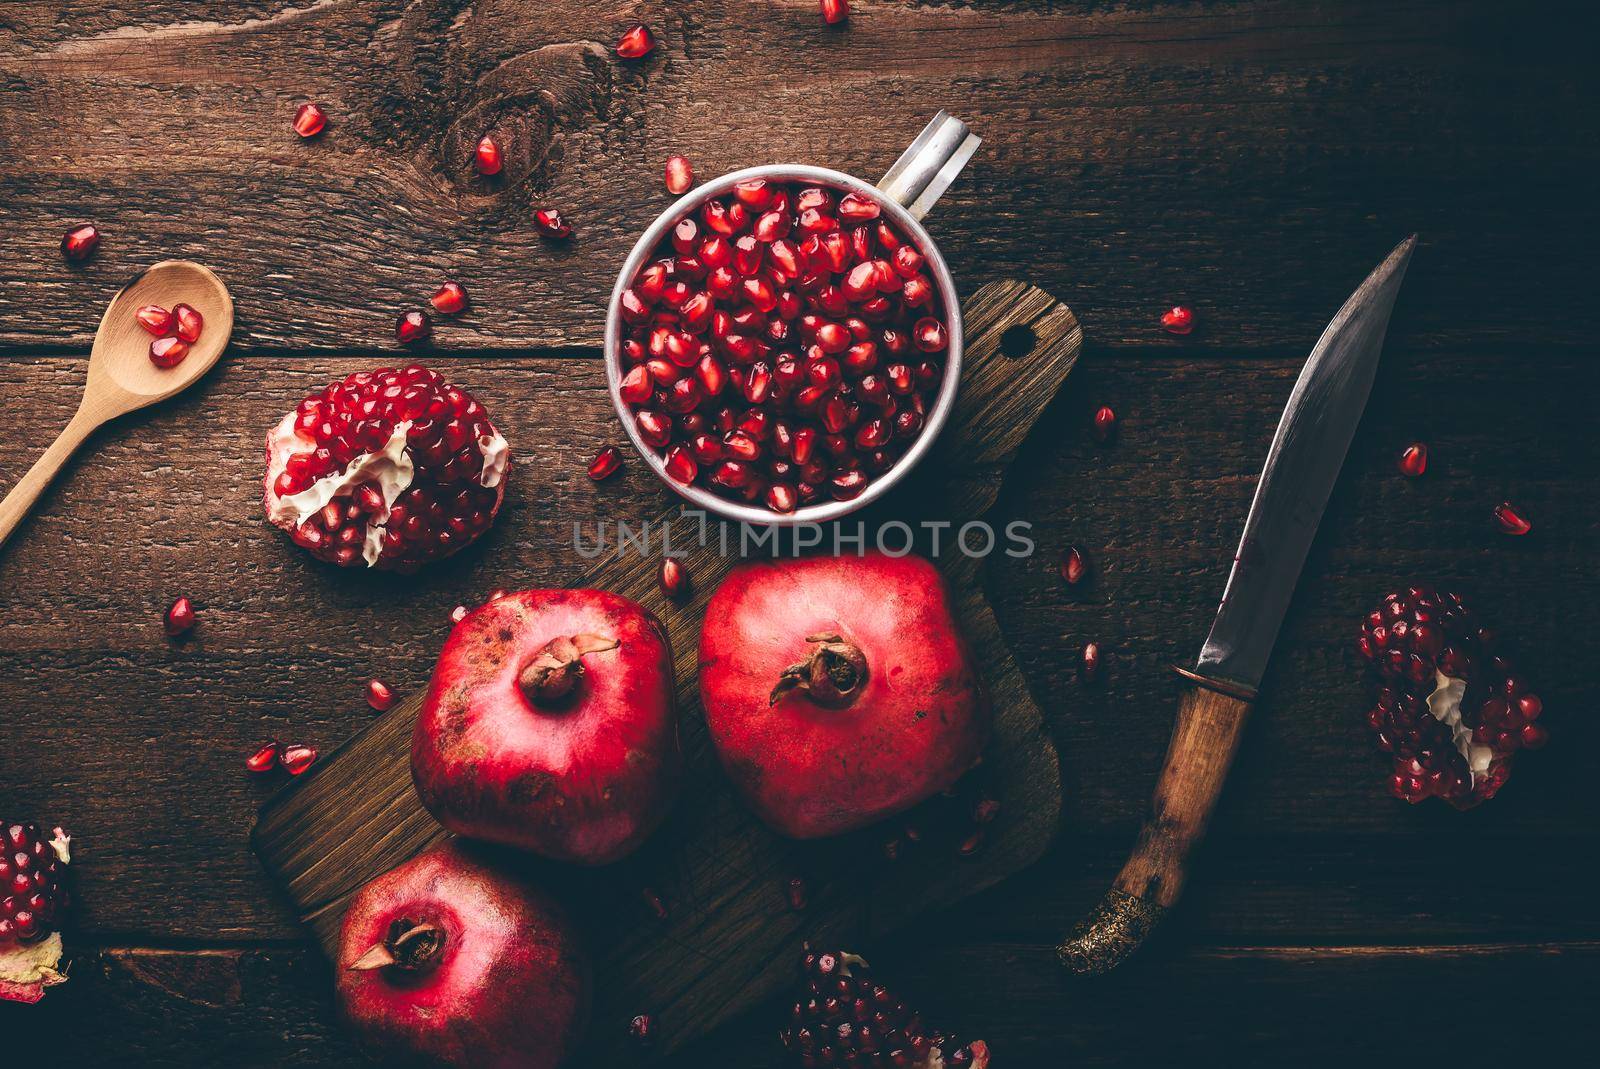 Metal mug full of pomegranate seeds. Whole fruits and pomegranate pieces on rustic wooden table. View from above